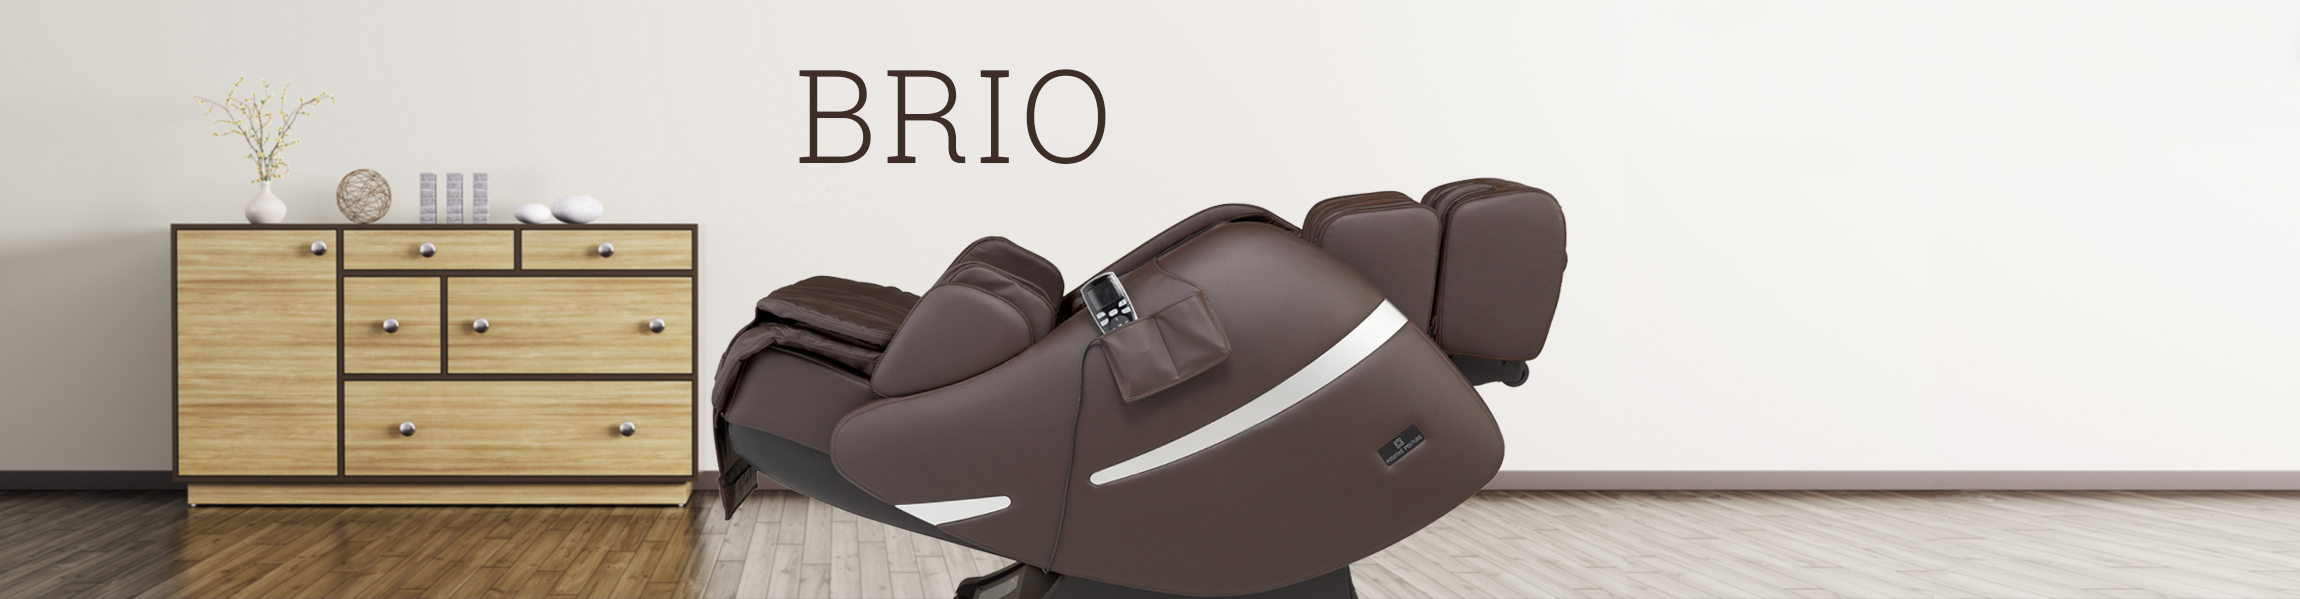 Brio is available in Cream, Dark Brown, and Black